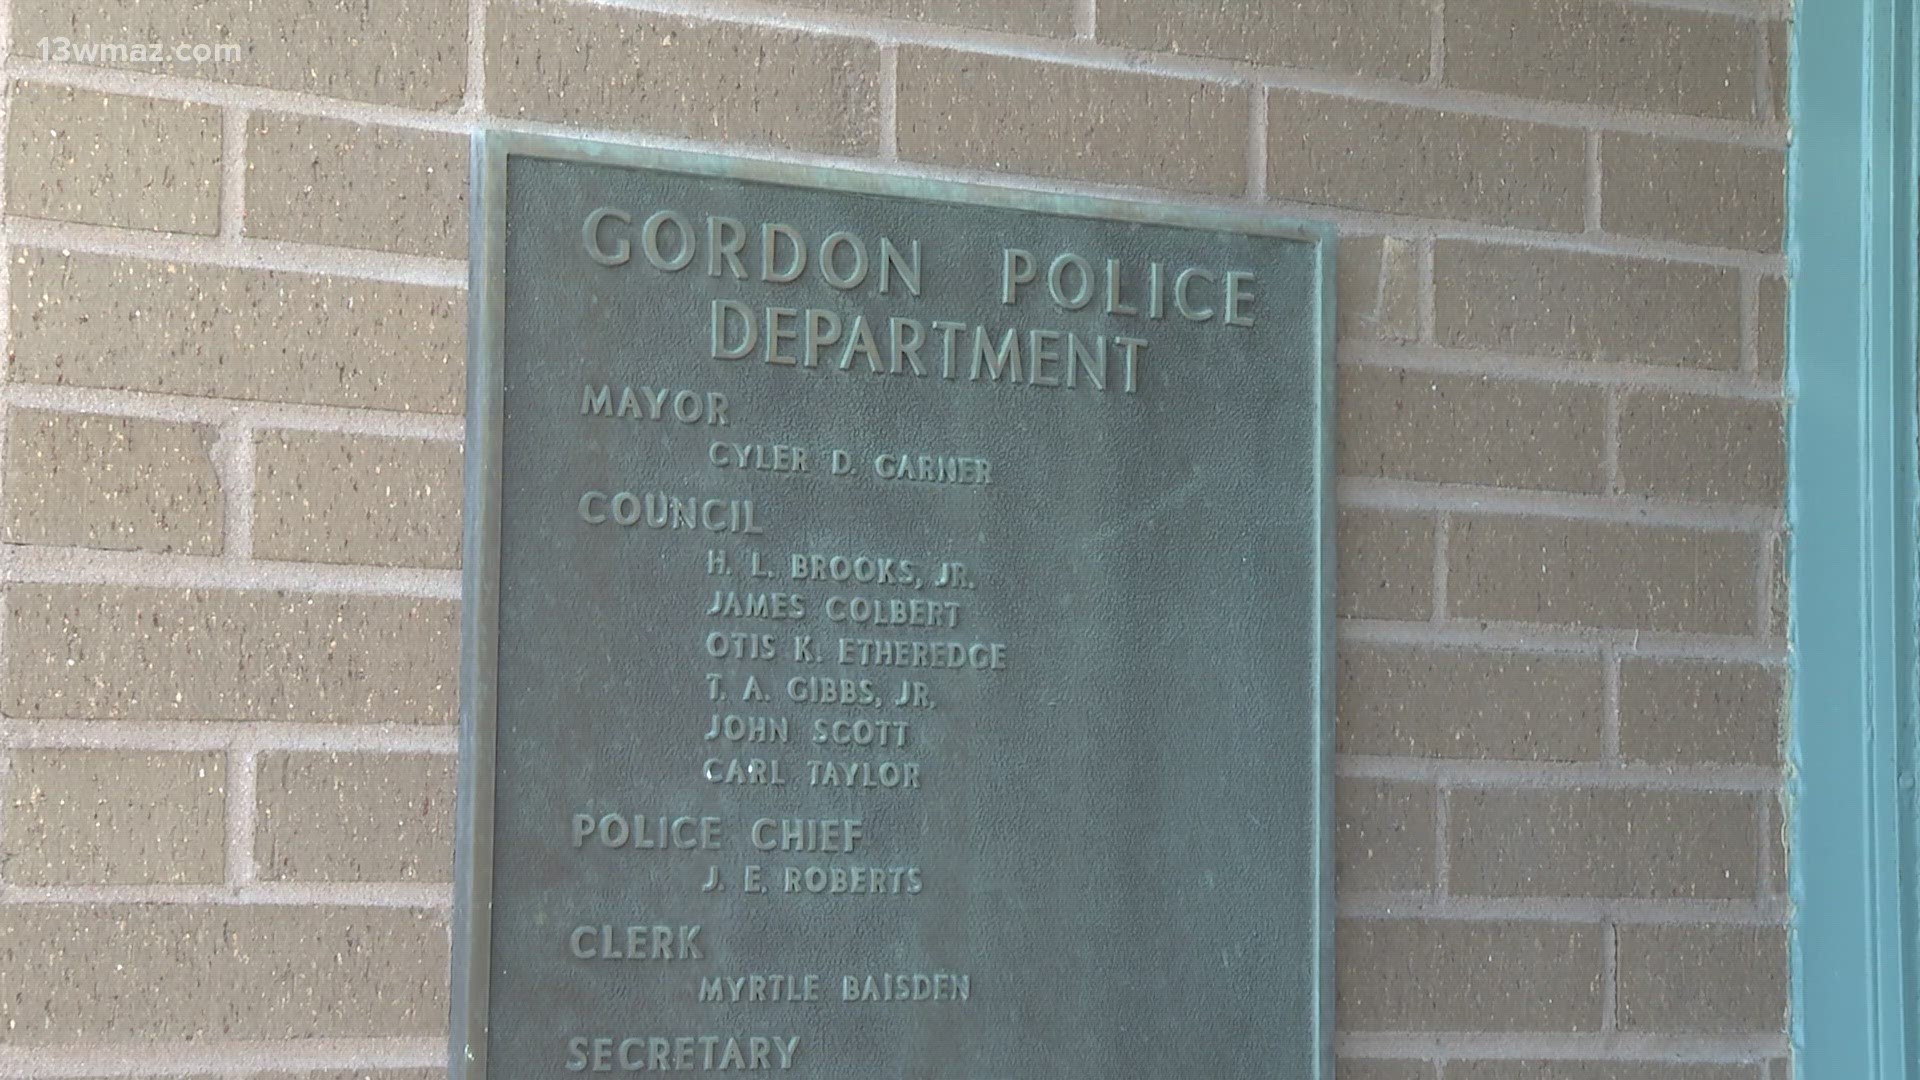 Residents in Gordon express their concern after a string of shootings occurred over the weekend